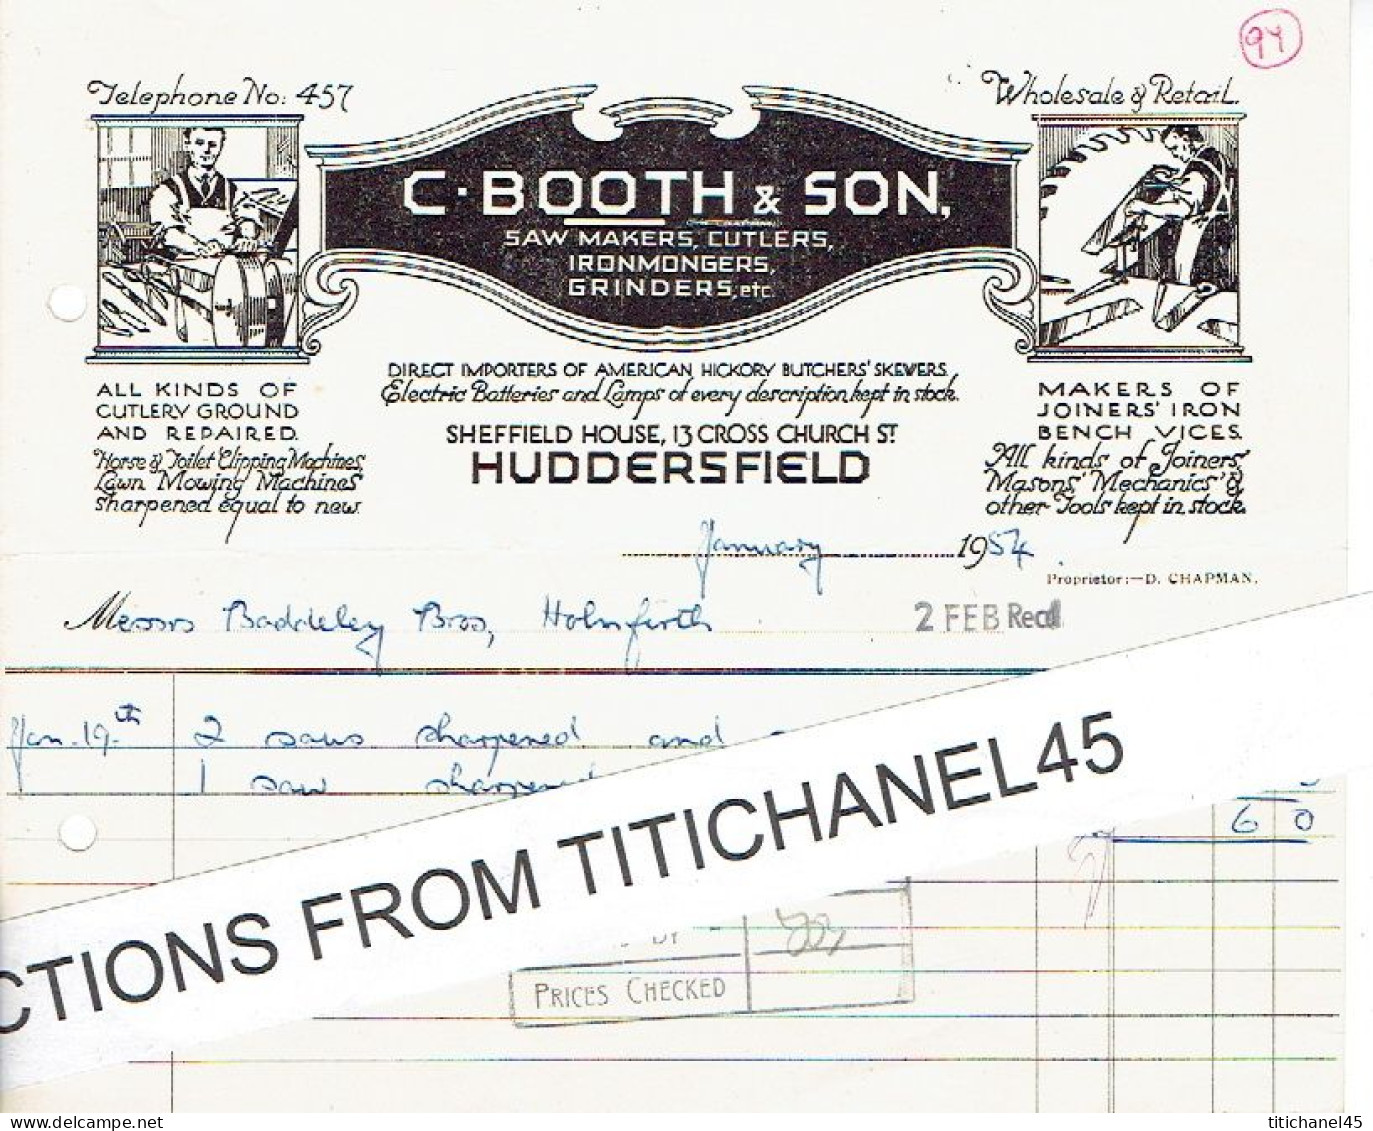 1954 HUDDERSFIELD - Invoice From C. BOOTH & SON - Saw Makers, Cutlers, Ironmongers, Grinders... - Regno Unito